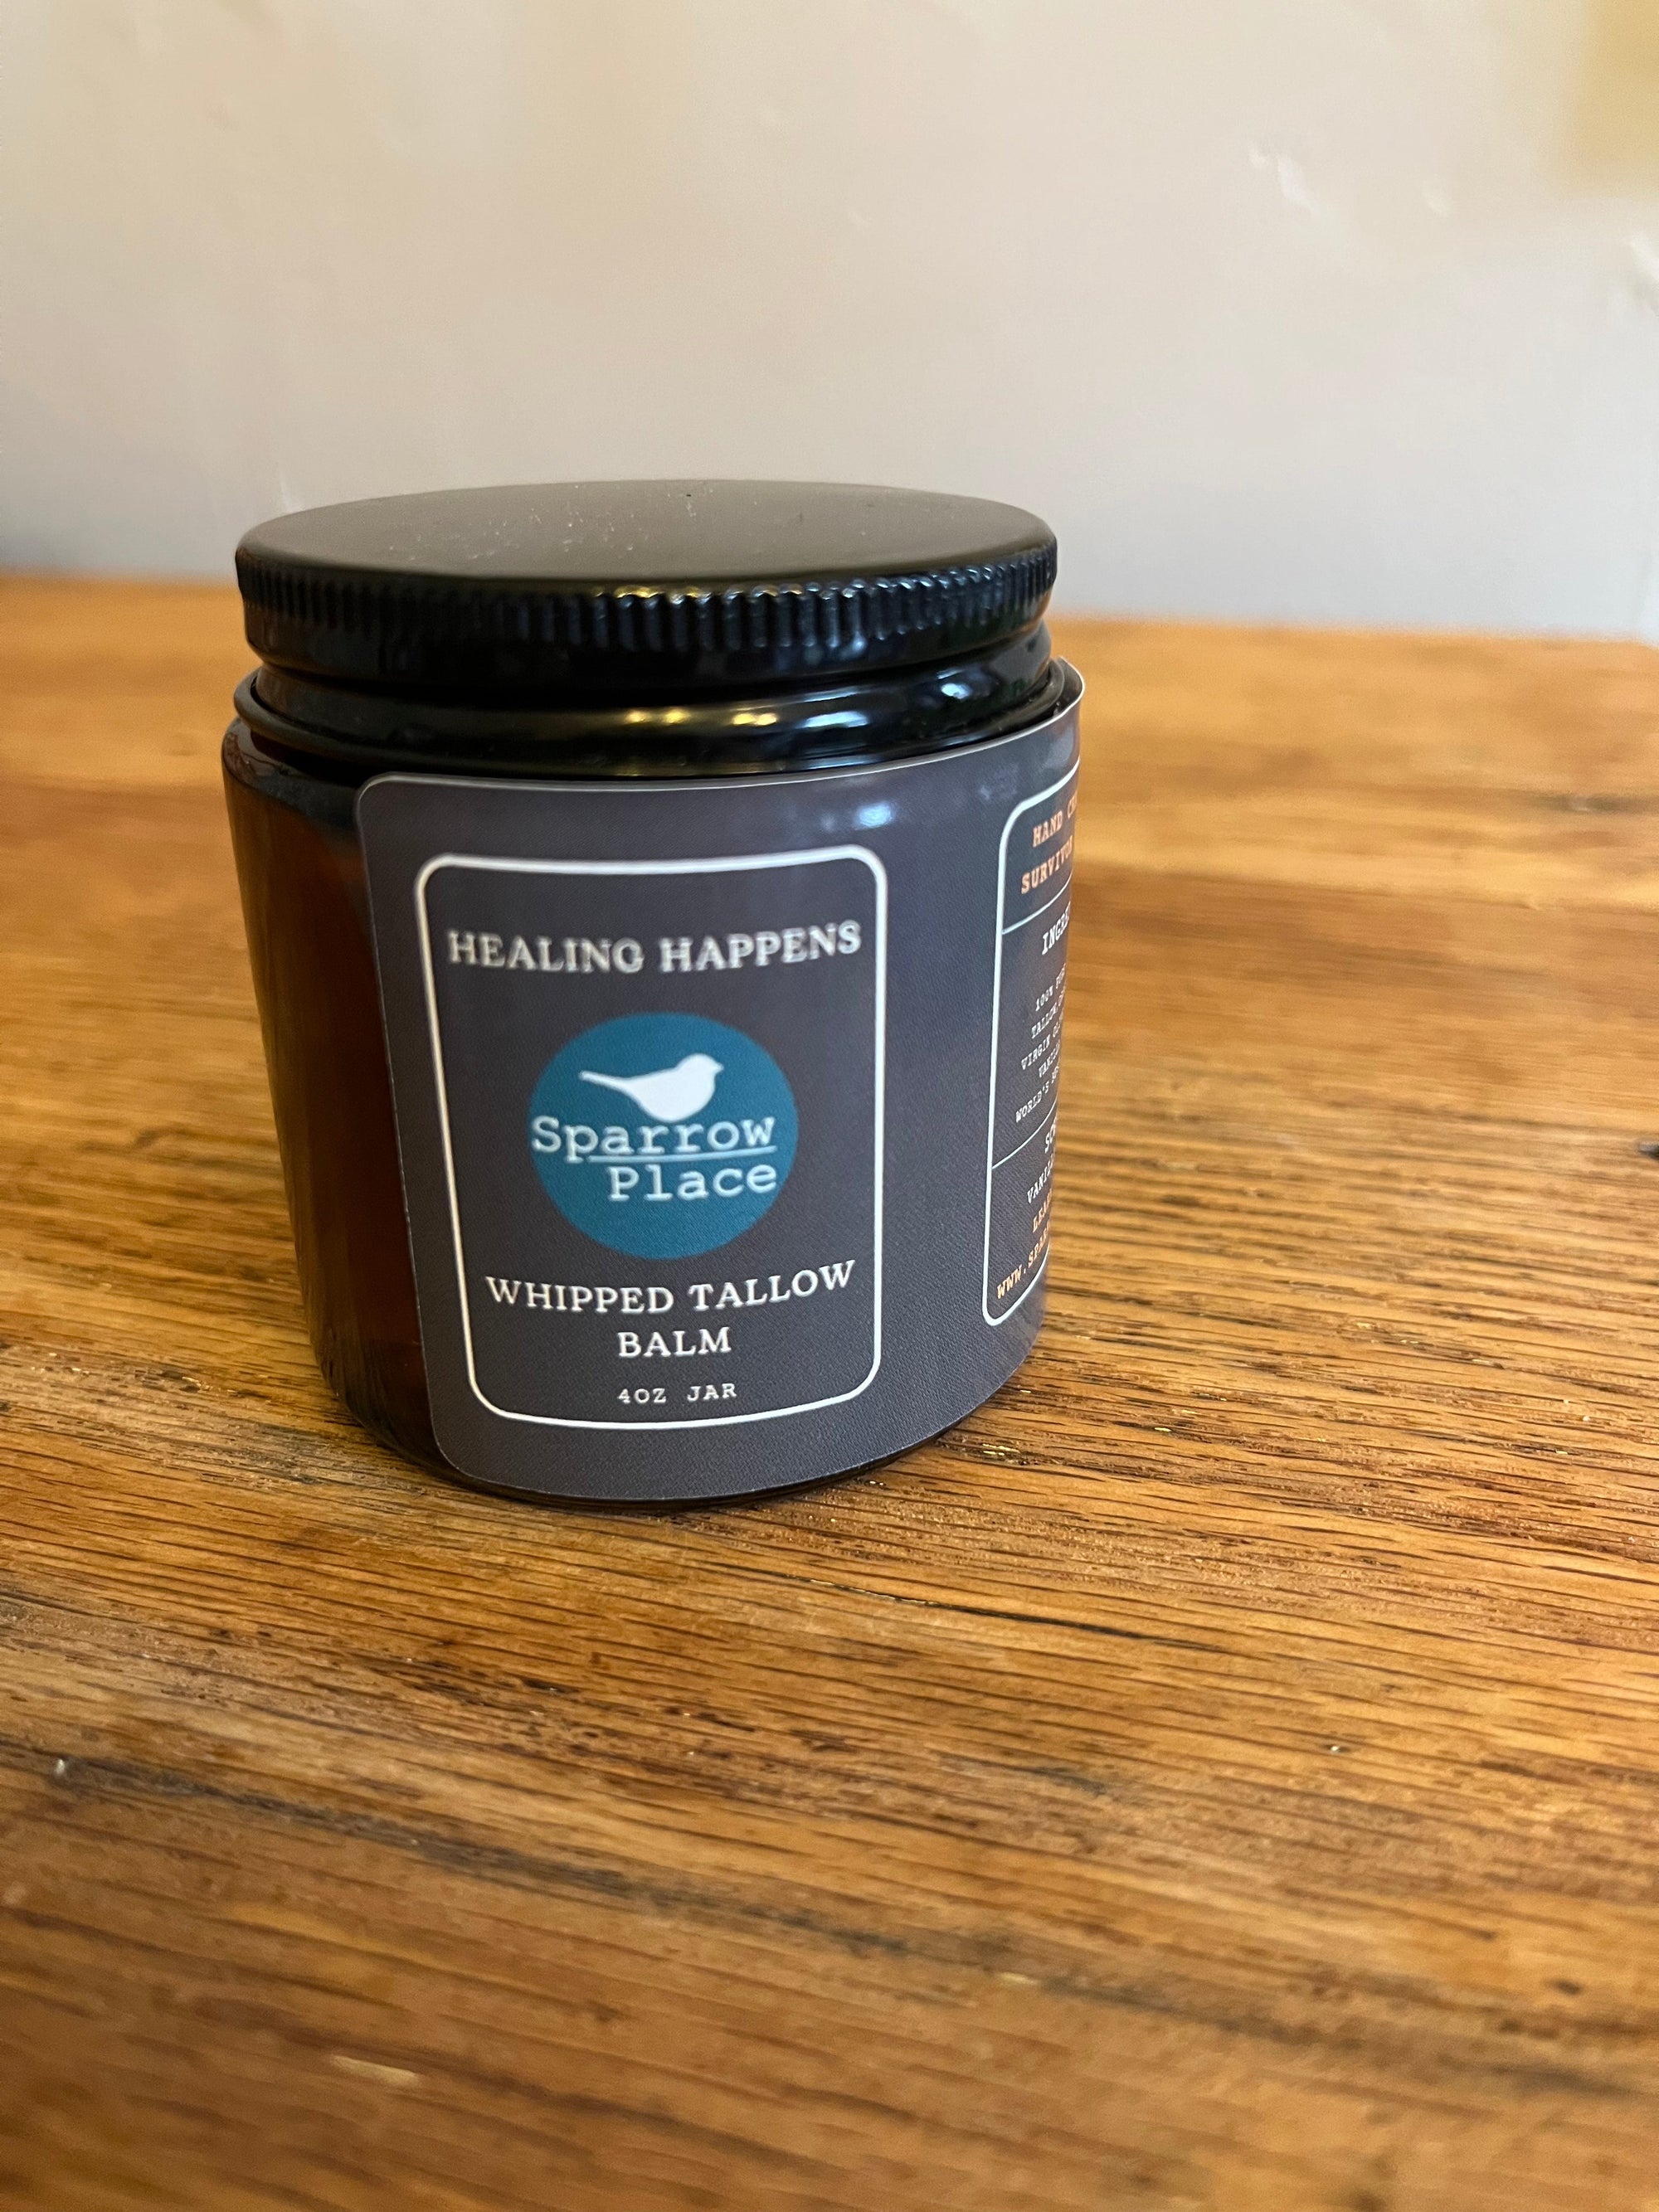 Whipped Tallow Balm / Sparrow Place